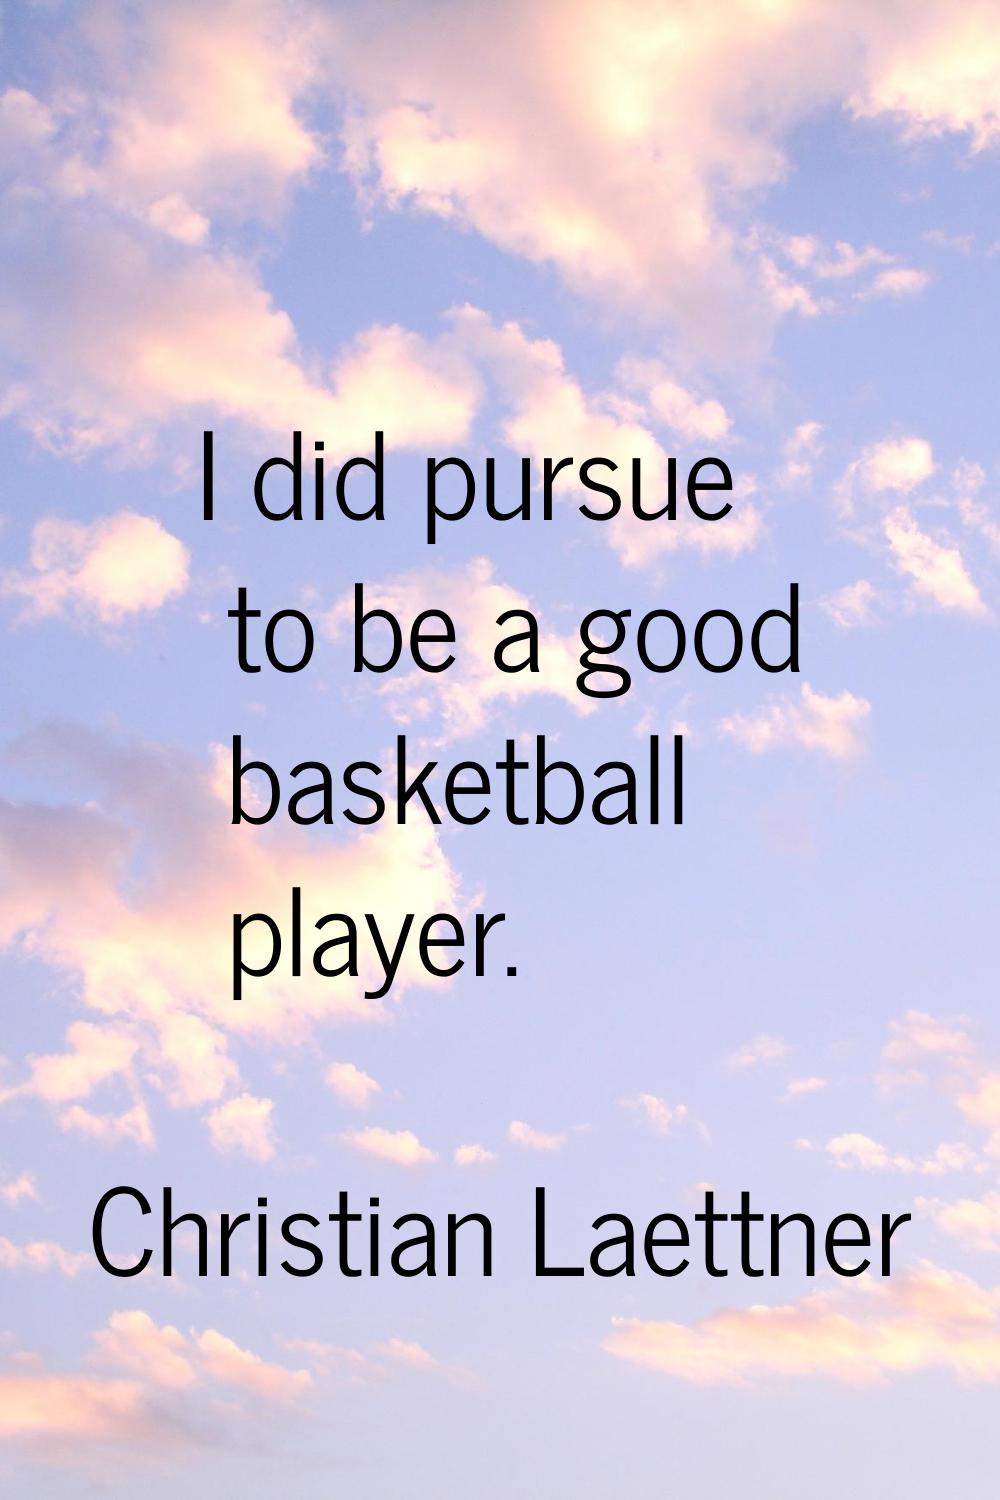 I did pursue to be a good basketball player.